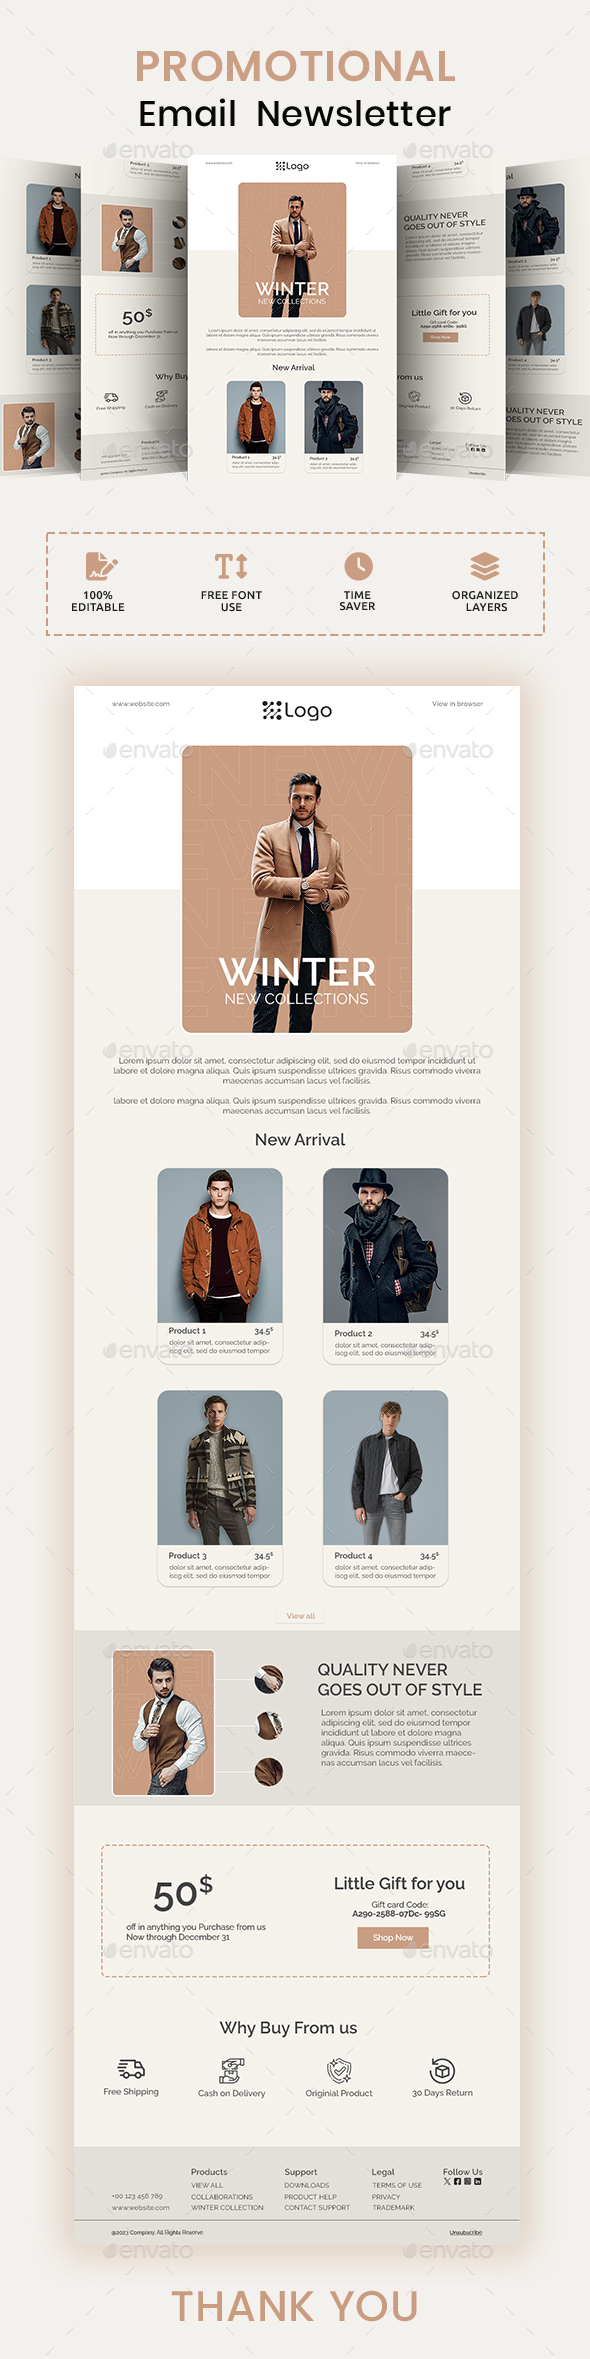 Winter Sale Email Newsletter PSD Template